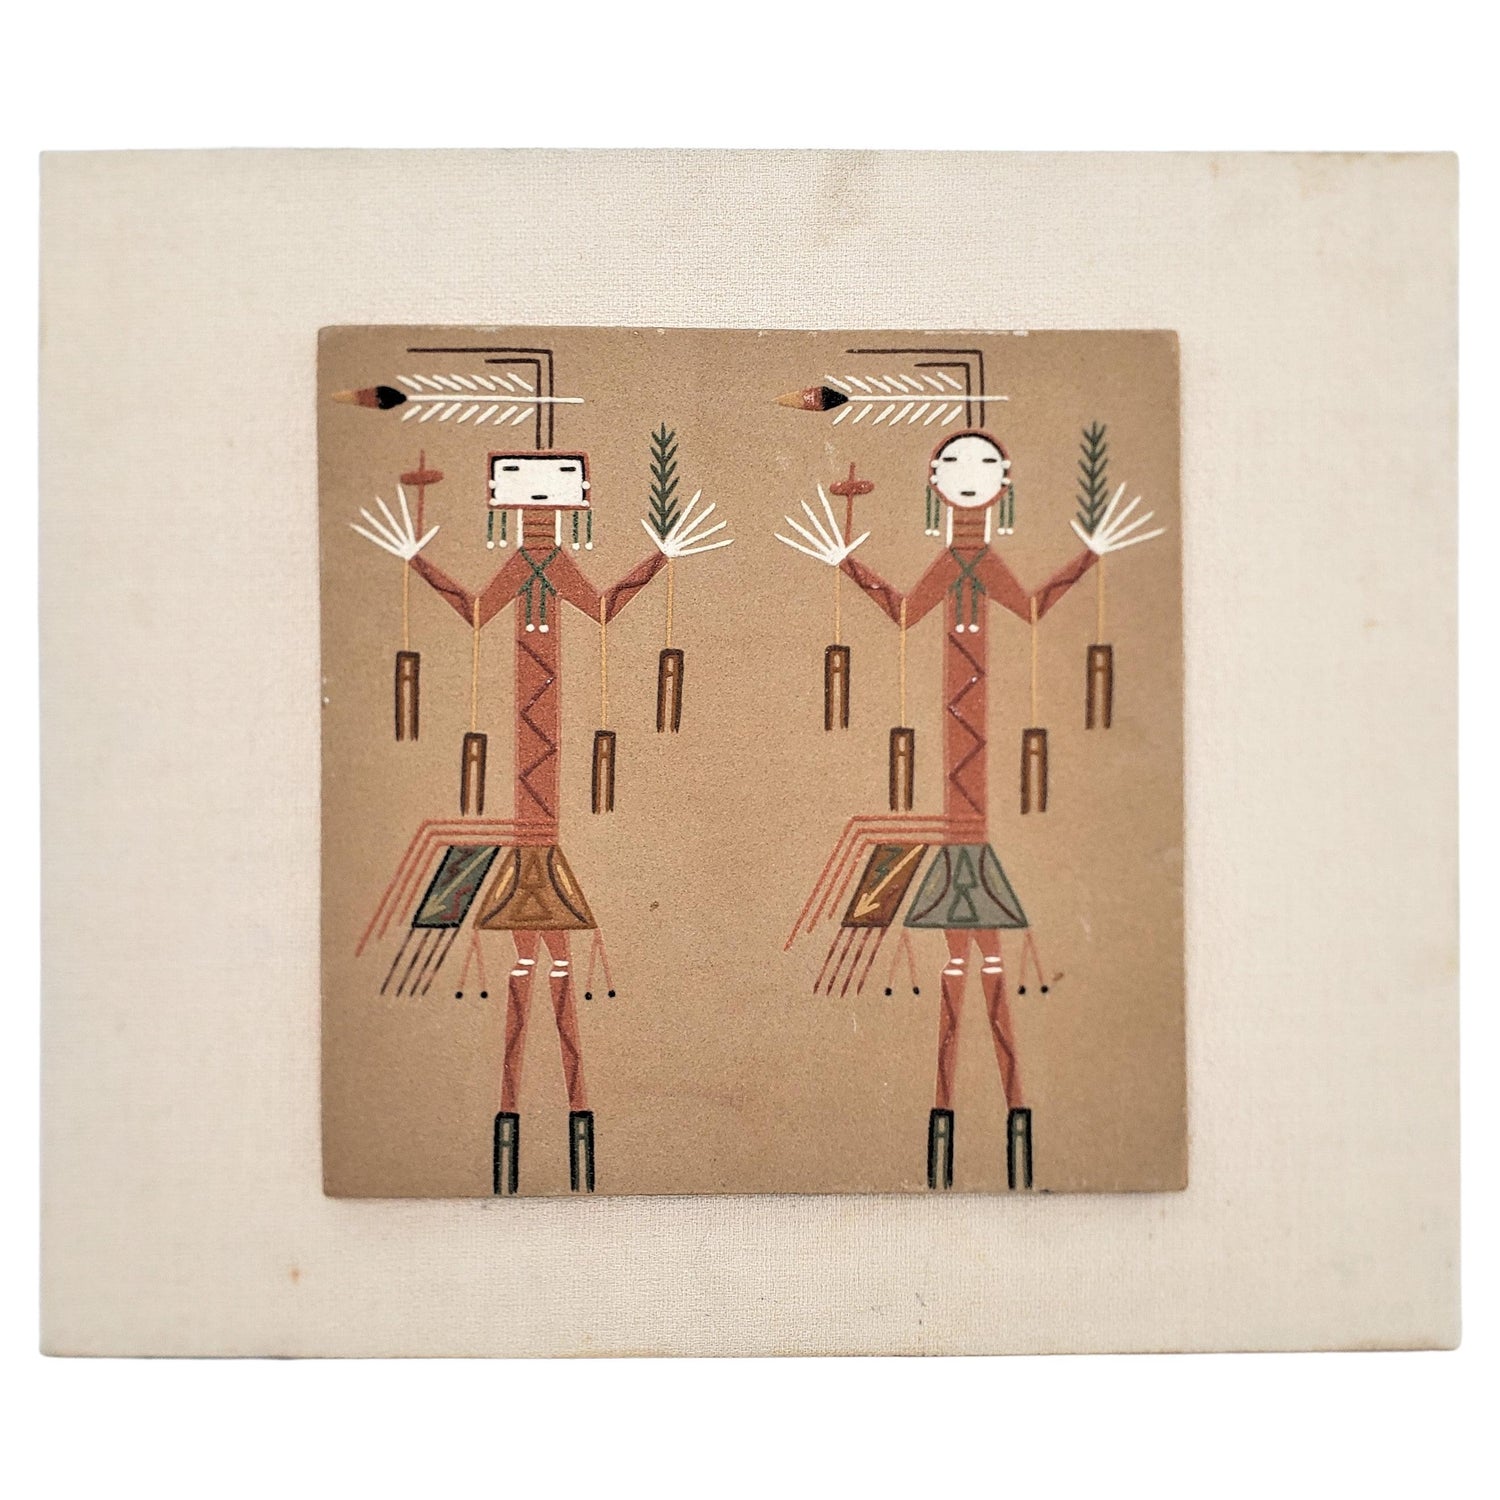 Vintage Indigenous Navajo Inspired Mounted Terracotta Tile Depicting 'Yei"  For Sale at 1stDibs